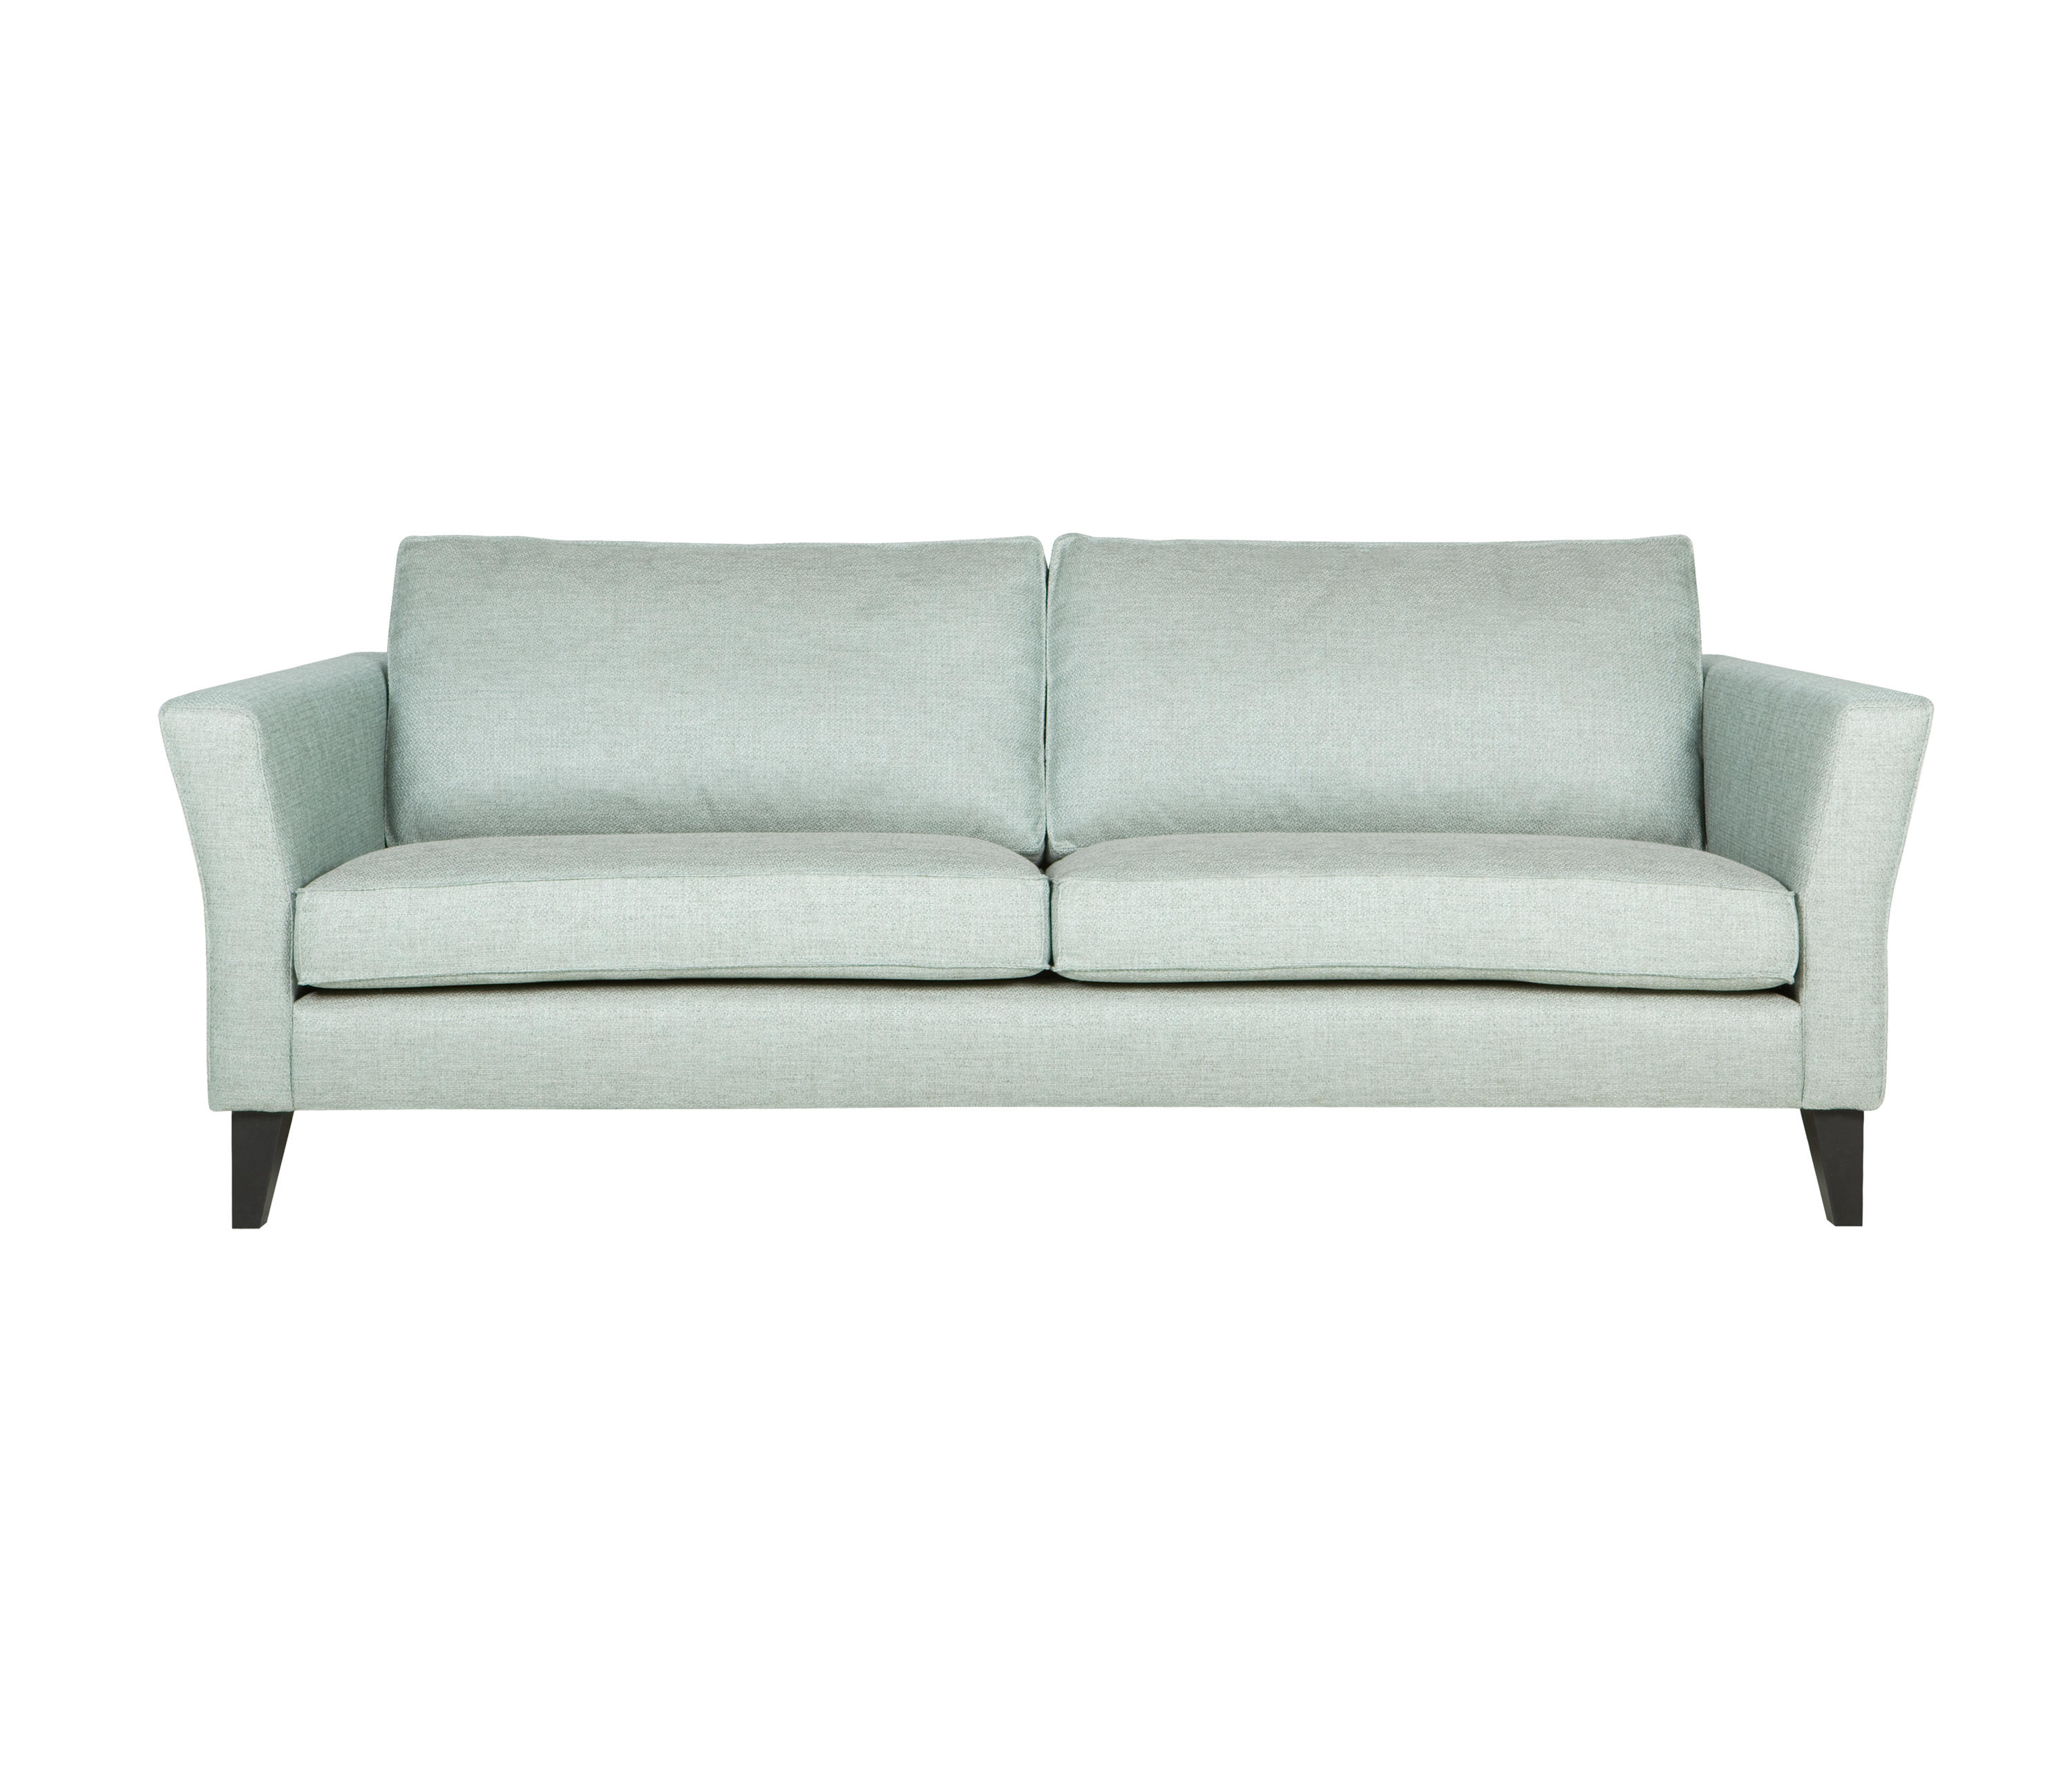 CAPRICE - Sofas from SITS | Architonic